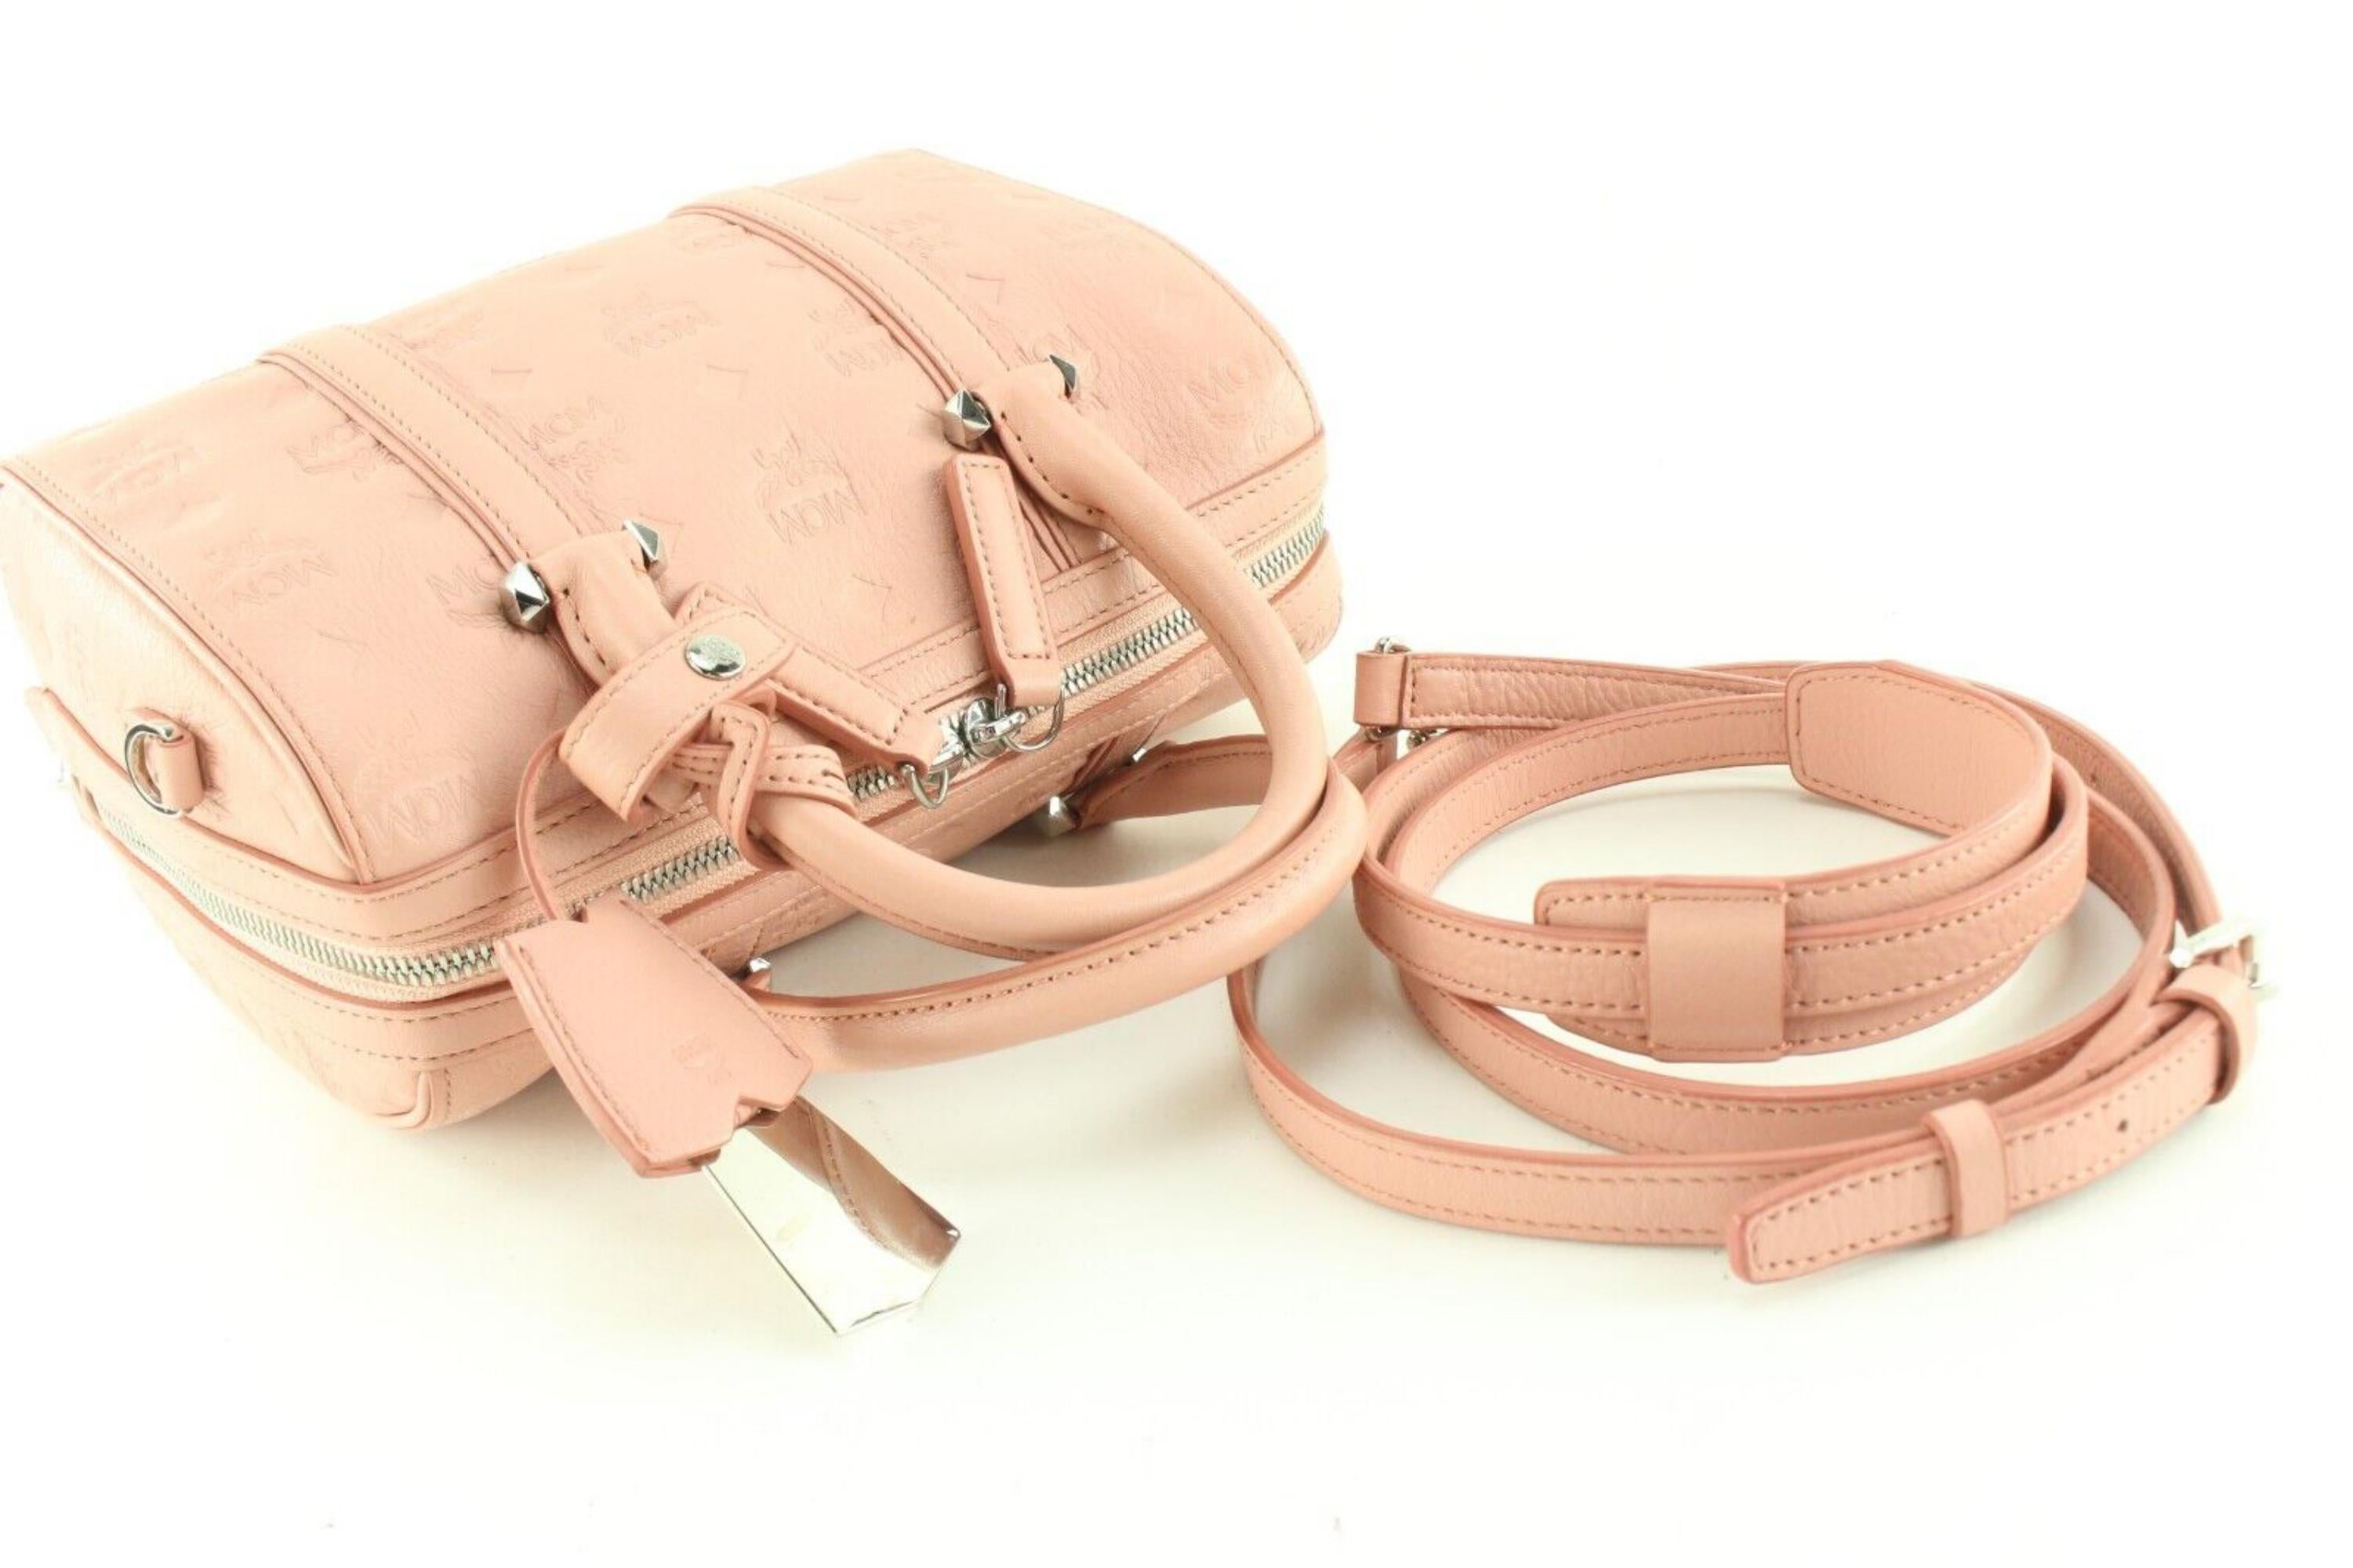 Women's MCM Pink Blush Embossed Leather Boston Bag with Strap 1MCM0502